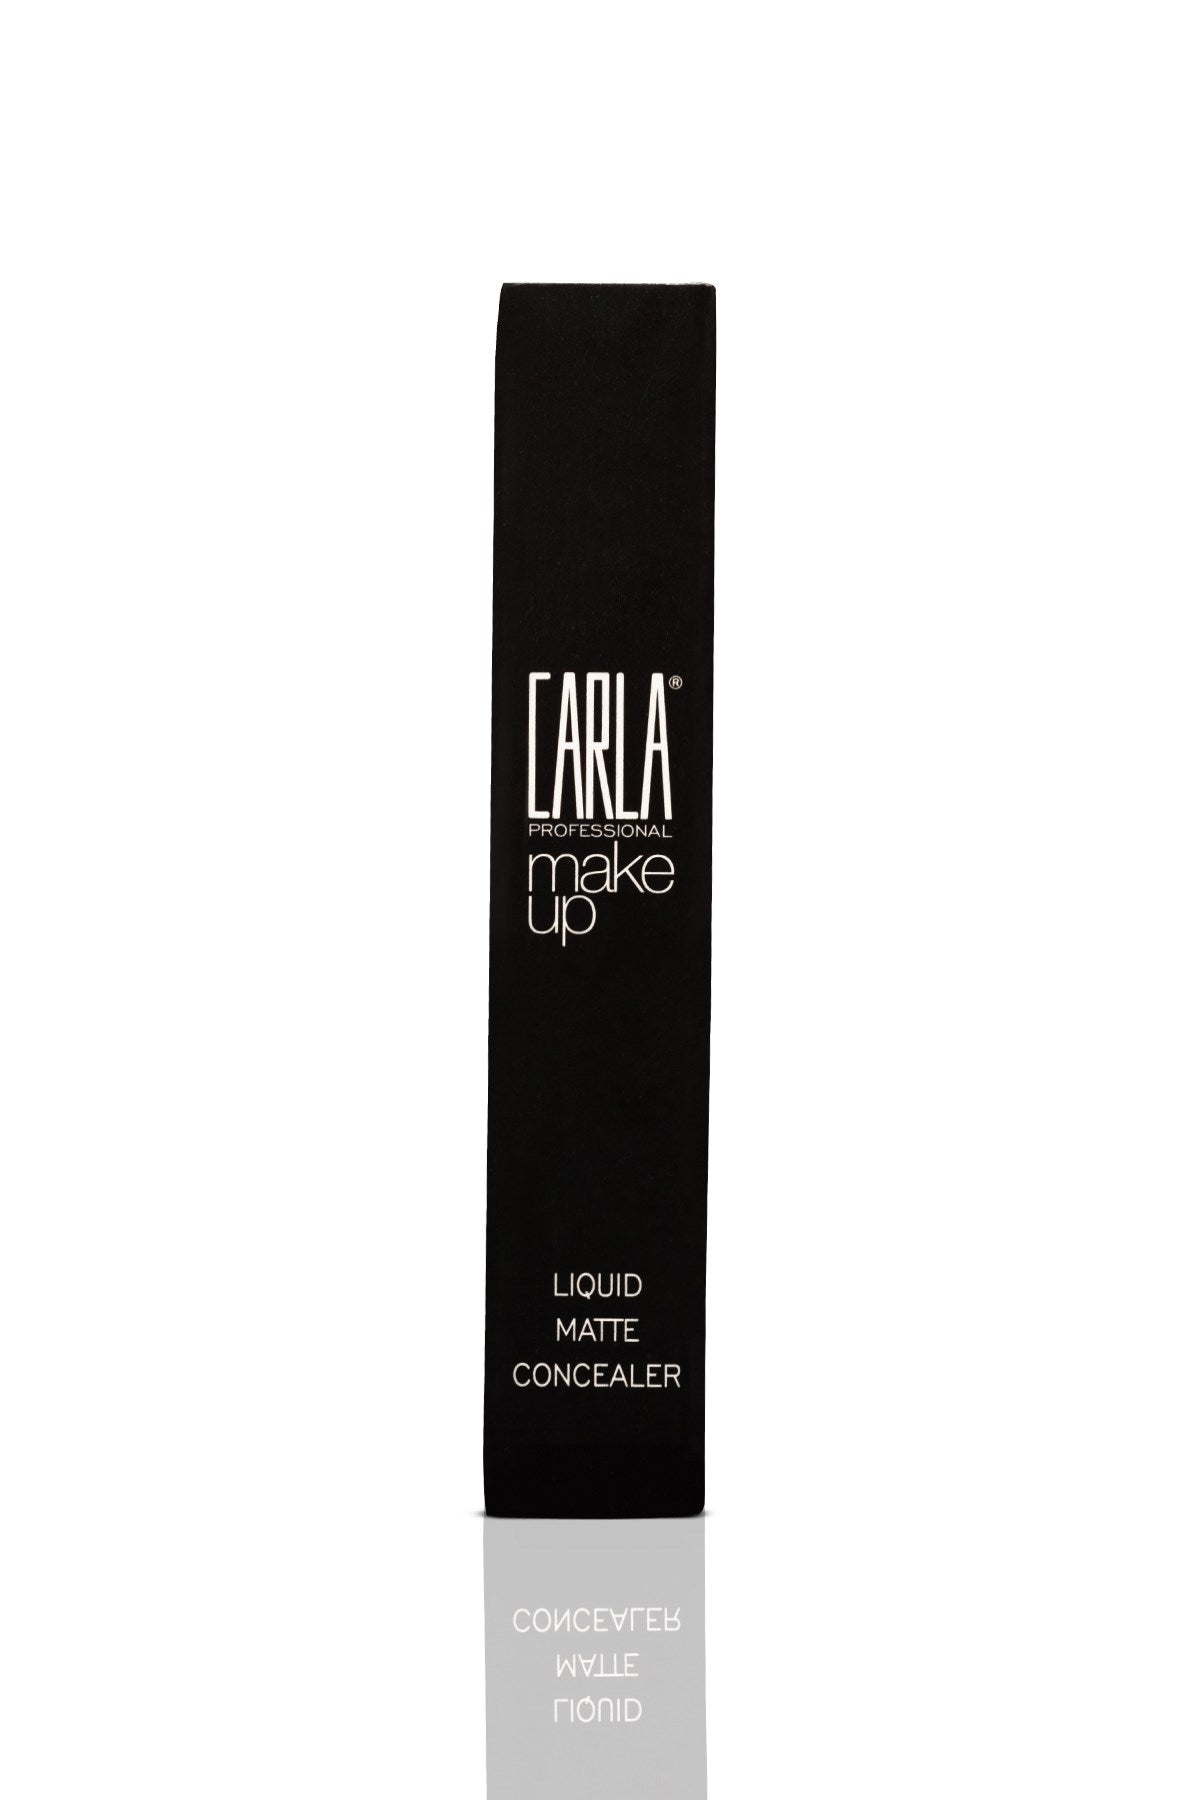 Carla Liquid Matte Concealer - Shade No: 403 - Flawless Coverage for All-Day Confidence